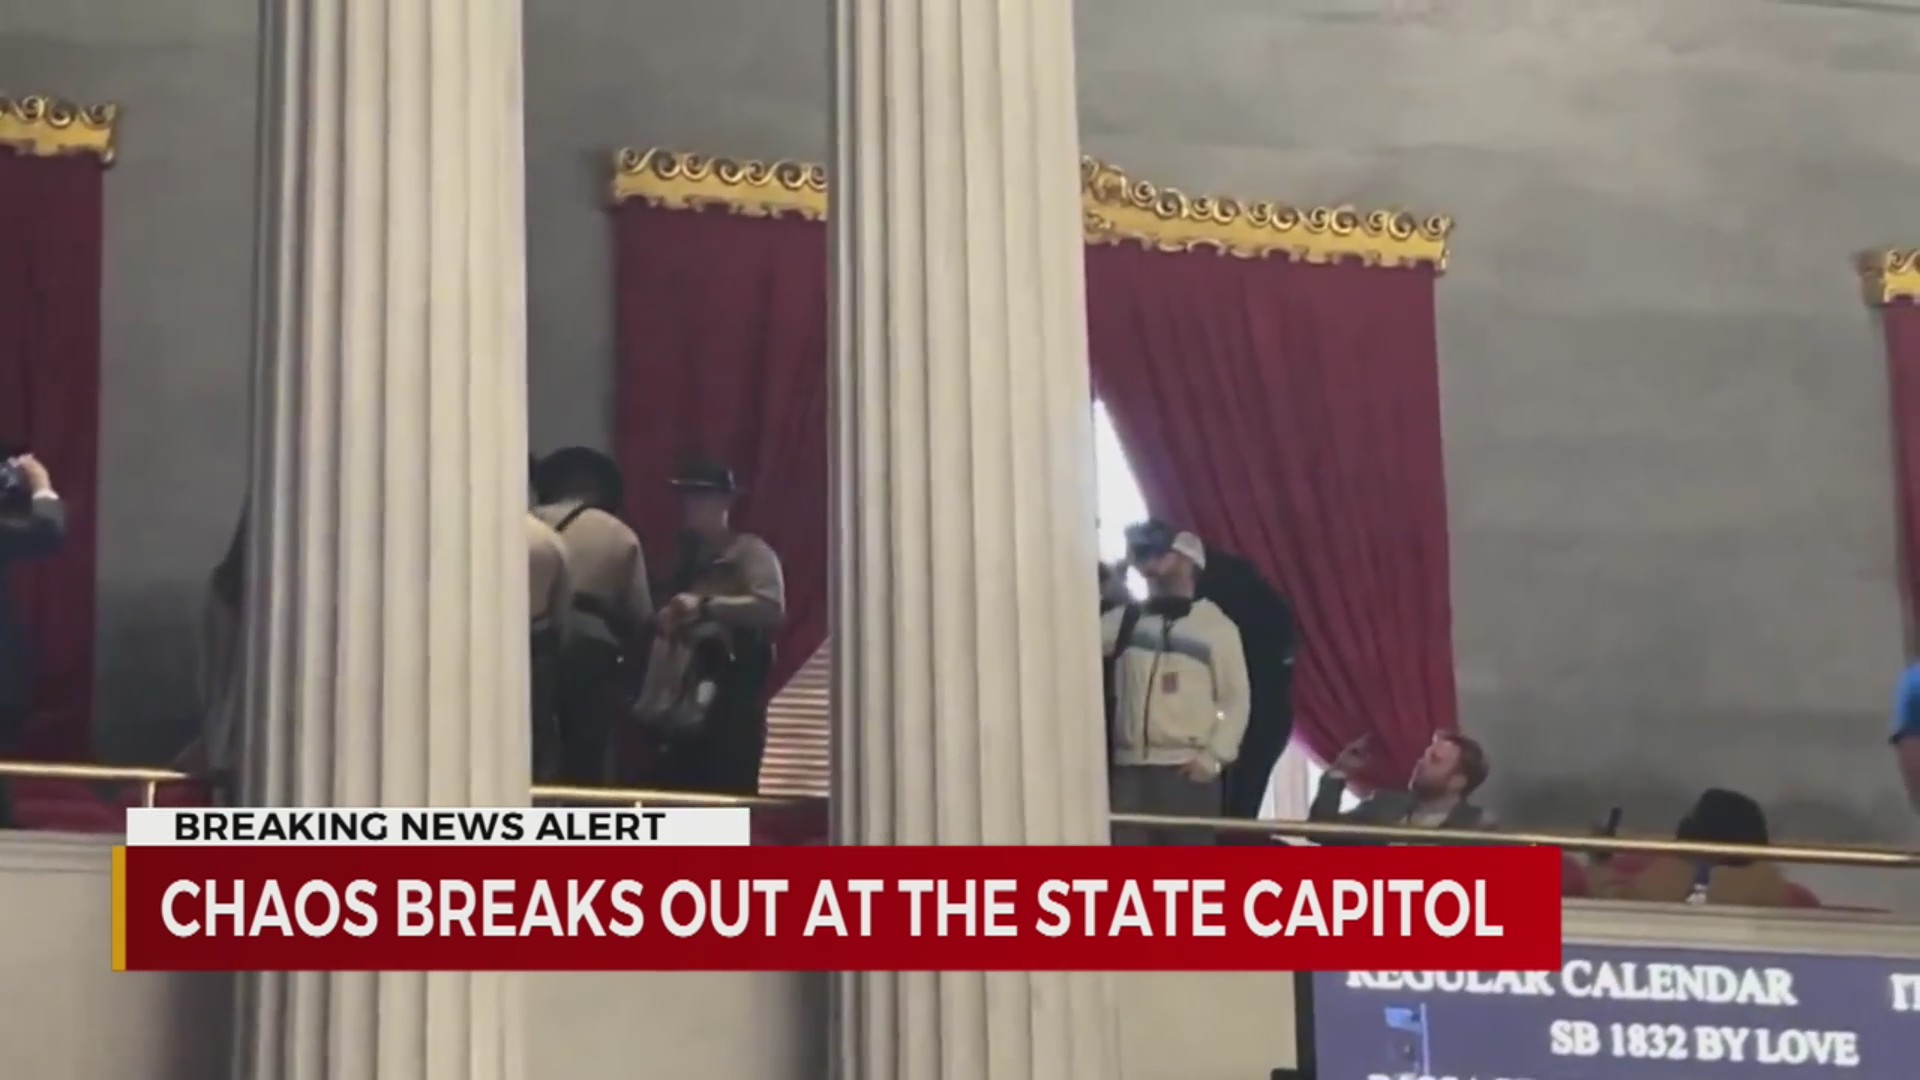 Chaos breaks out at TN State Capitol